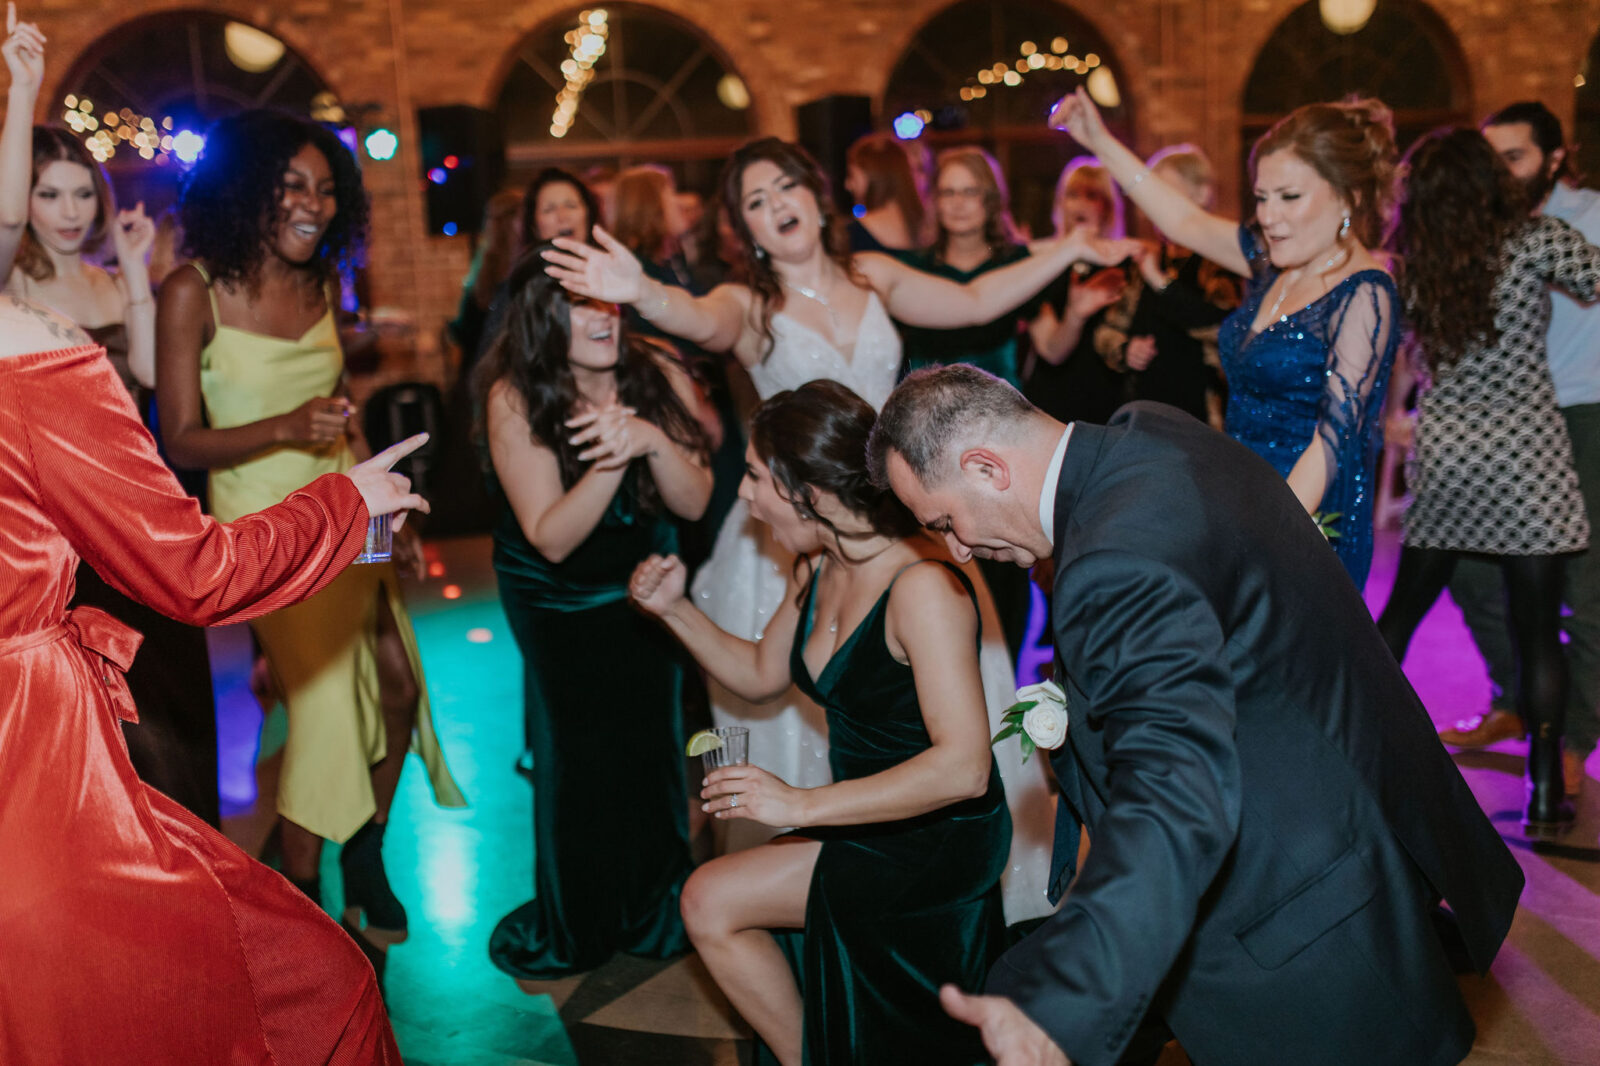 Wedding DJ from Milwaukee with guests dancing on the dance floor